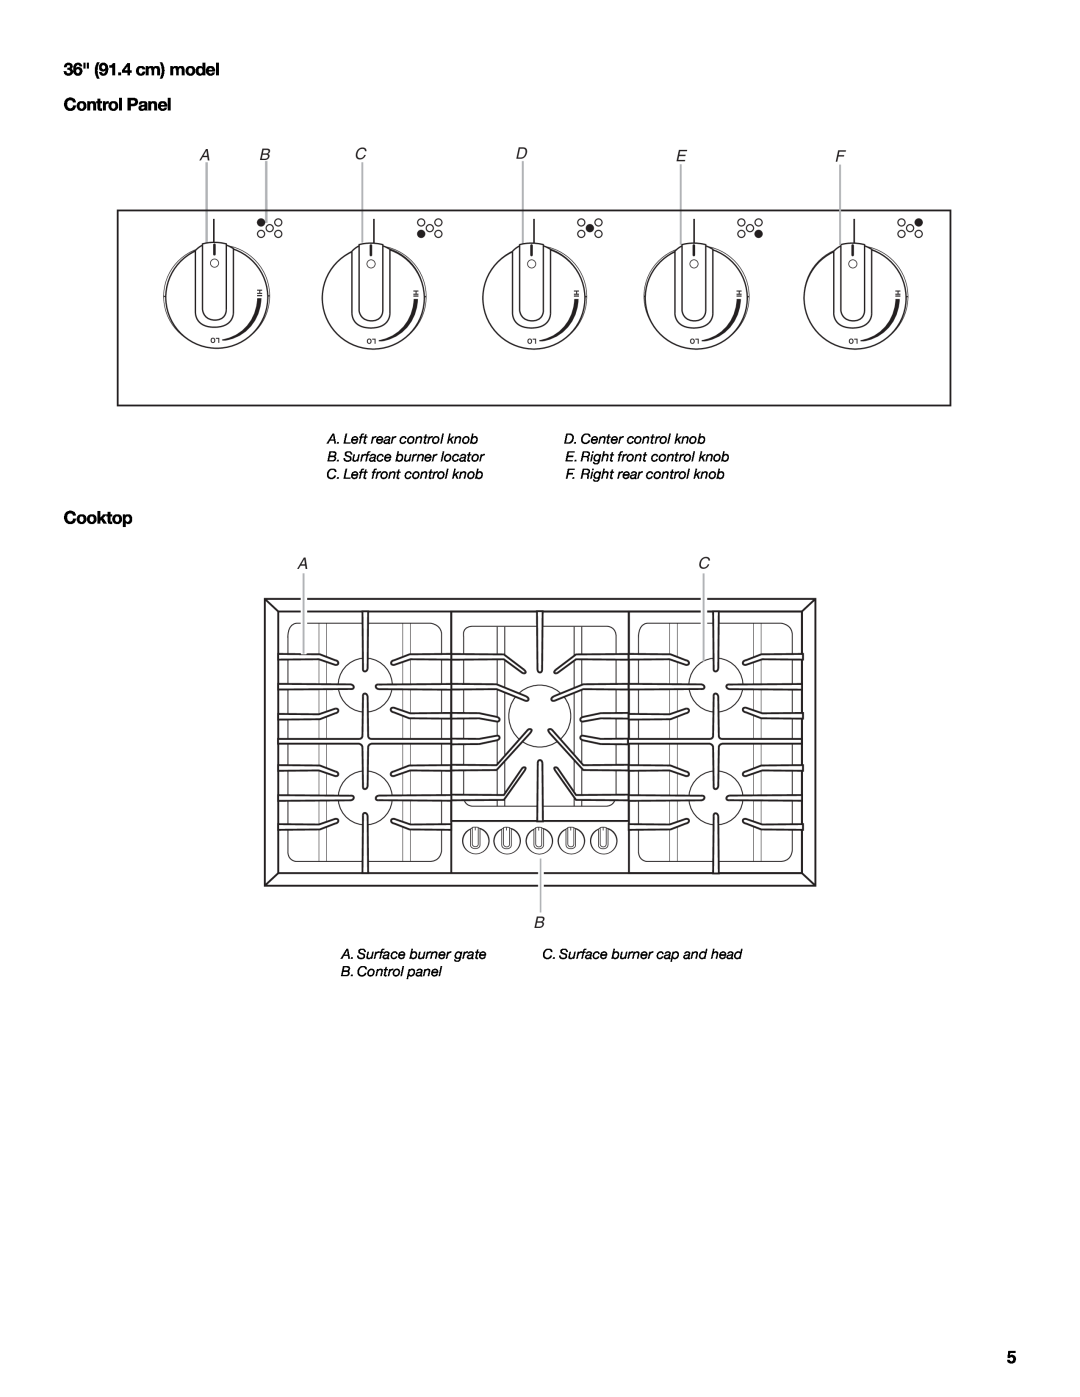 Whirlpool 9761890 manual Cooktop, A Bcdef, D. Center control knob, A. Surface burner grate, B. Control panel 